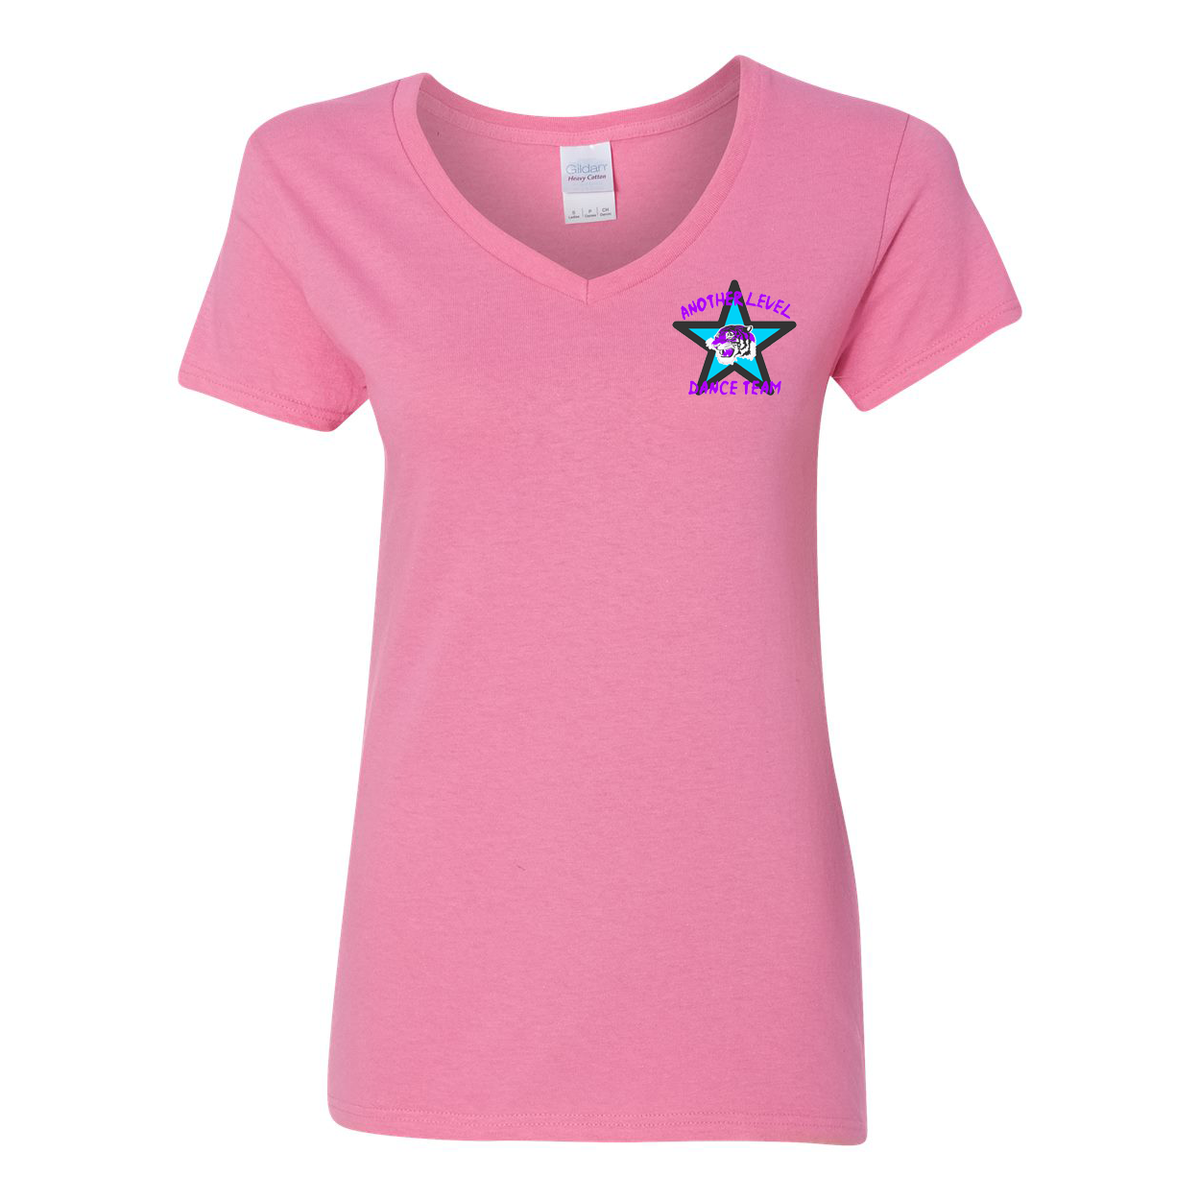 Another Level Dance Team Women's Heavy Cotton V-Neck Tee